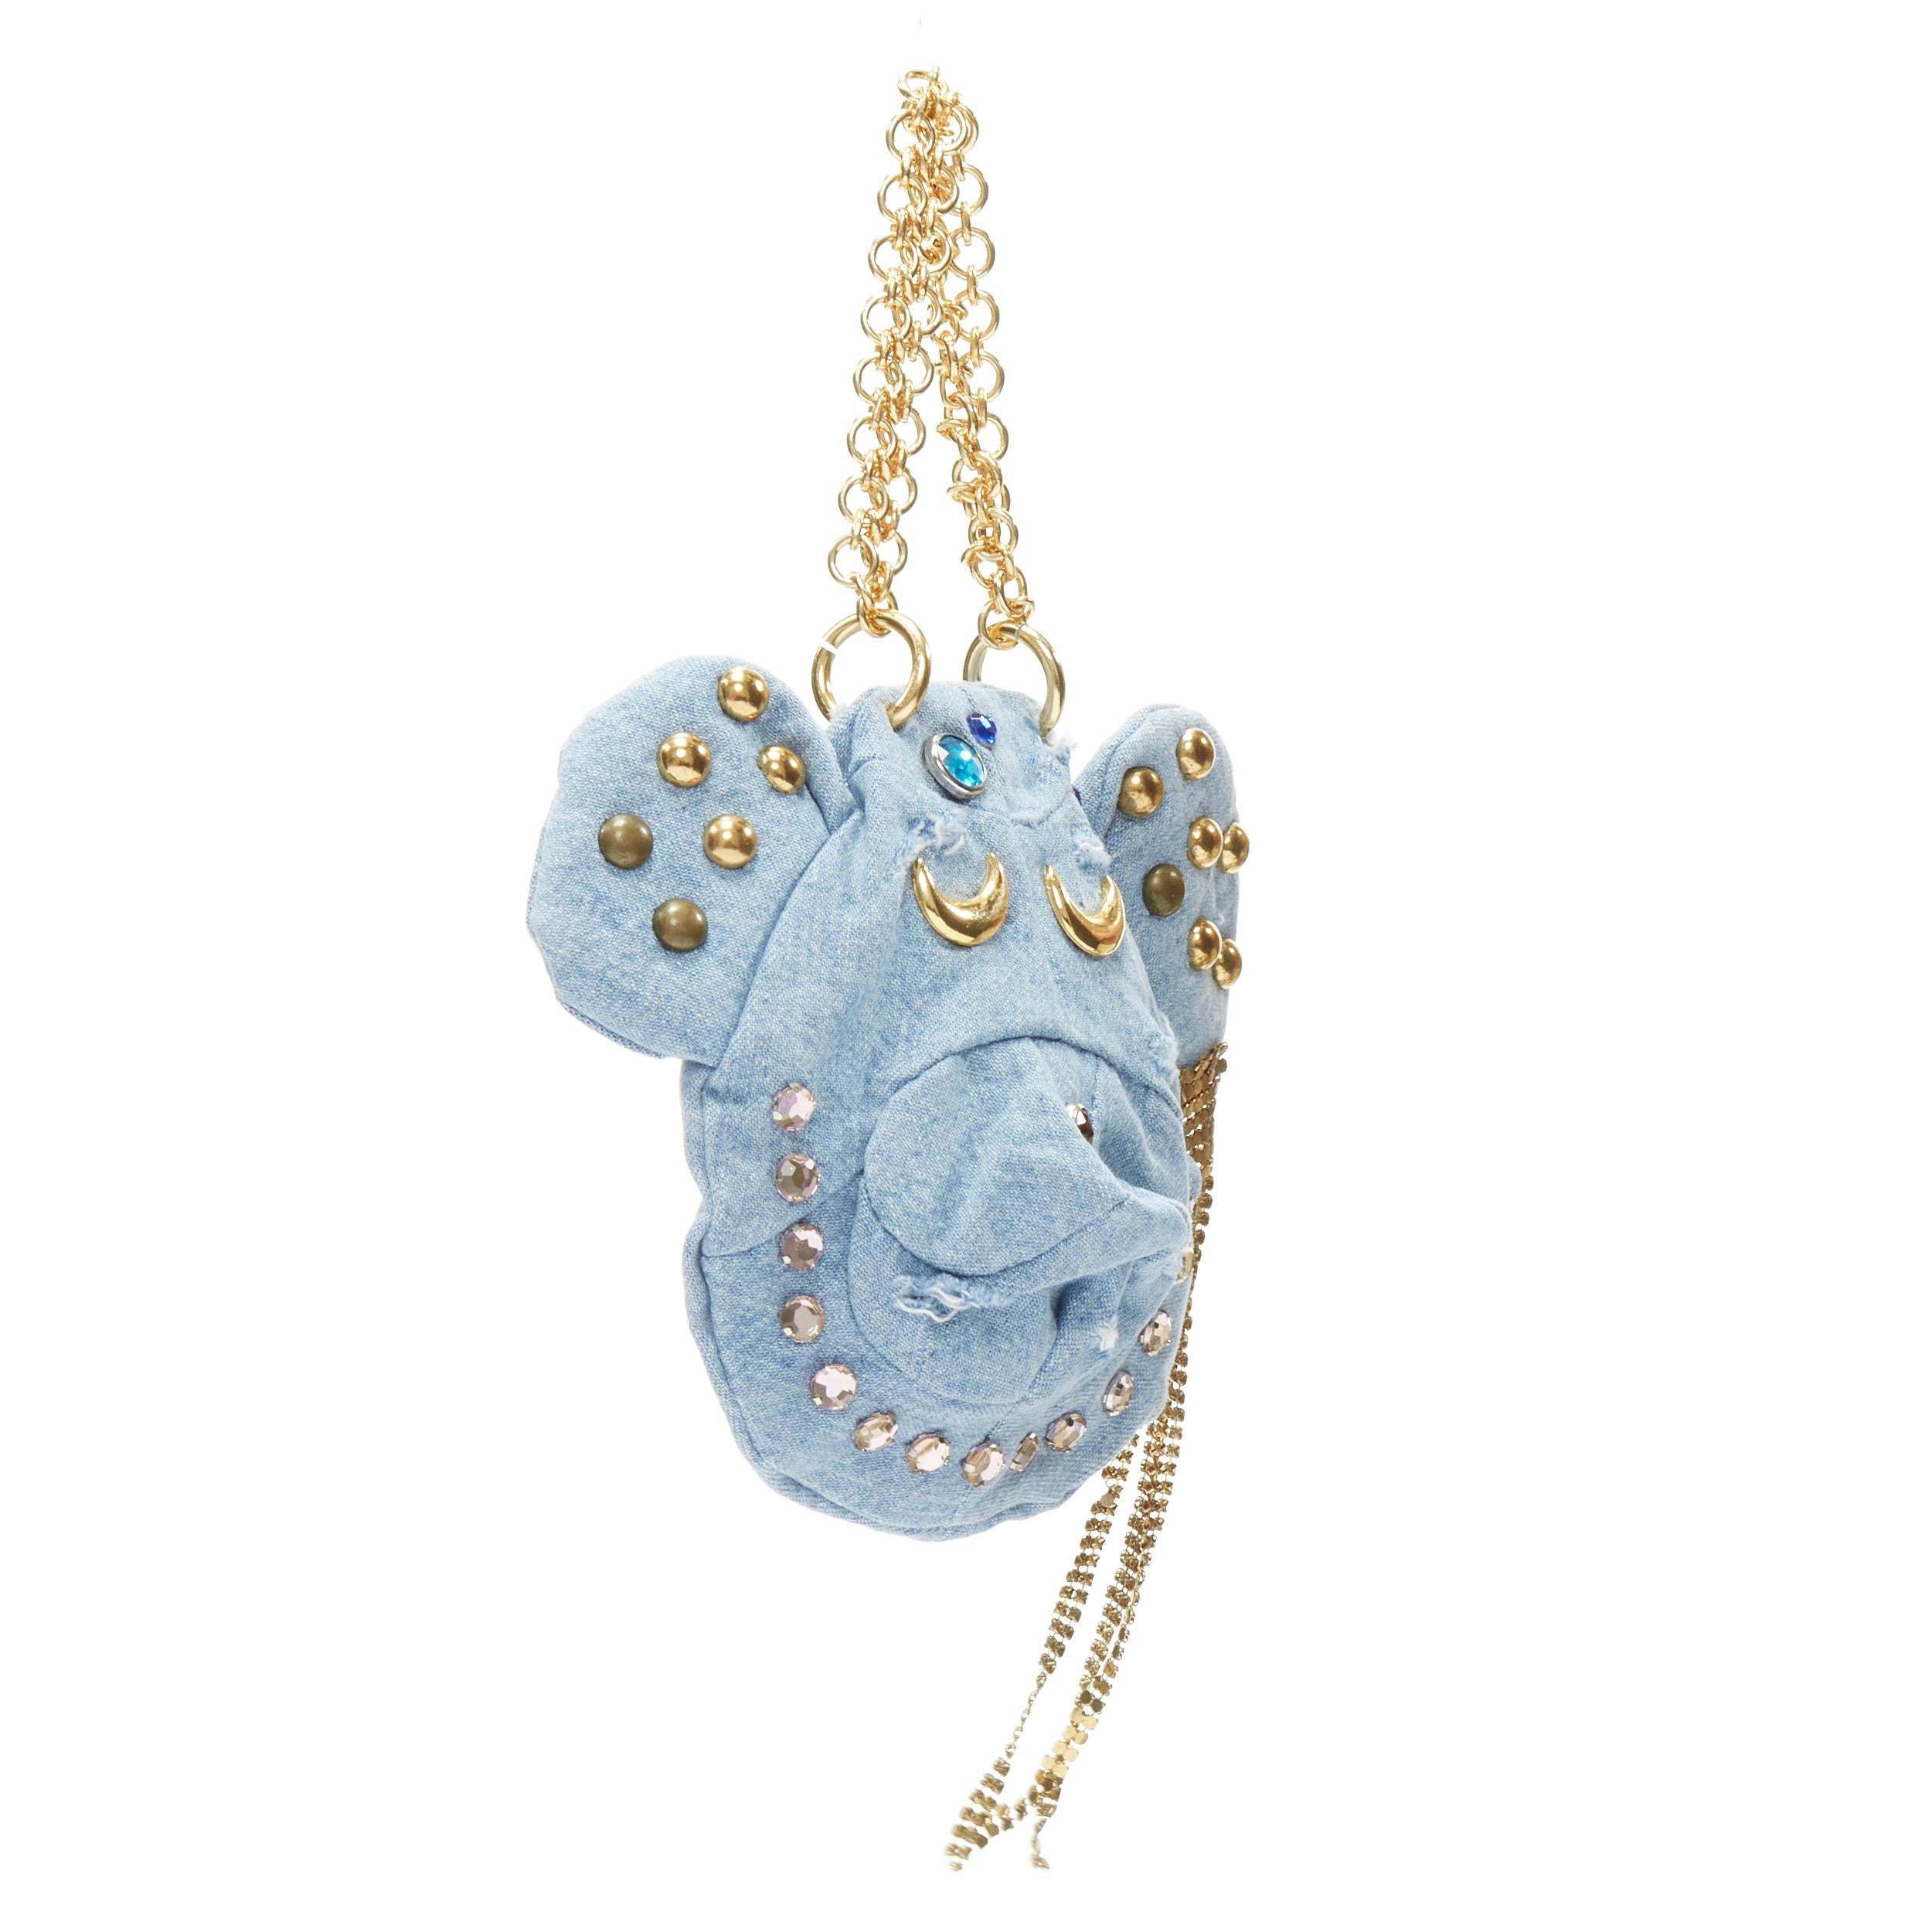 rare D&G DOLCE GABBANA Vintage blue distressed rhinestone chain bear pouch bag
Brand: D&G
Designer: Domenico Dolce and Stefano Gabbana
Material: Feels like cotton
Color: Brown
Pattern: Solid
Closure: Half Zip
Extra Detail: Distressed light blue